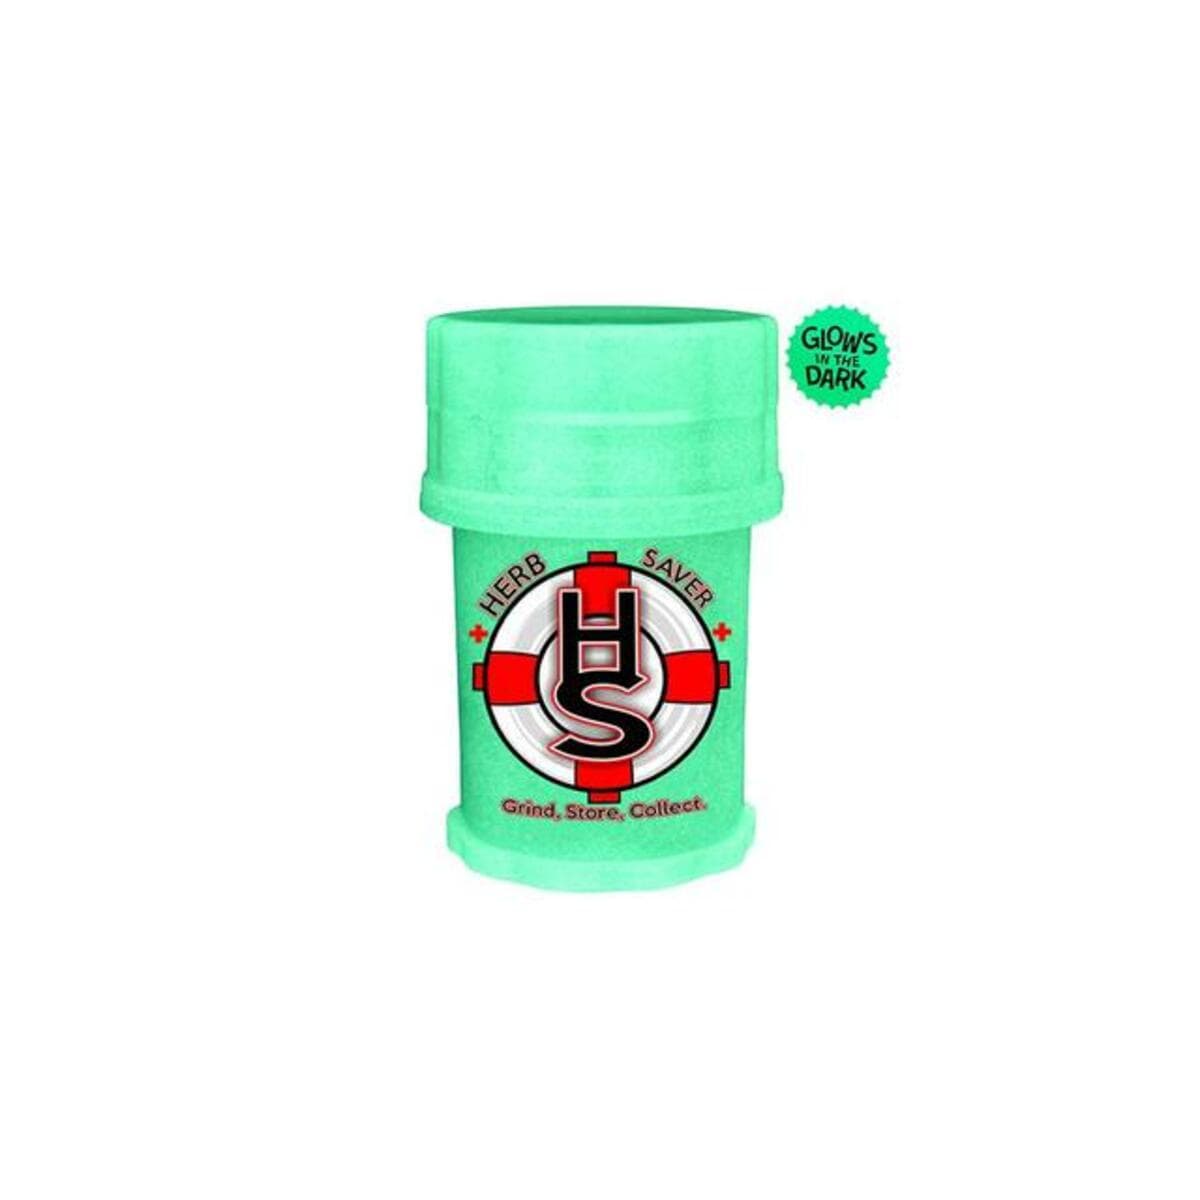 Herbsaver Grinder Knotted Letters / Glow In The Dark Mini Daily High Club x Herbsaver Grinder